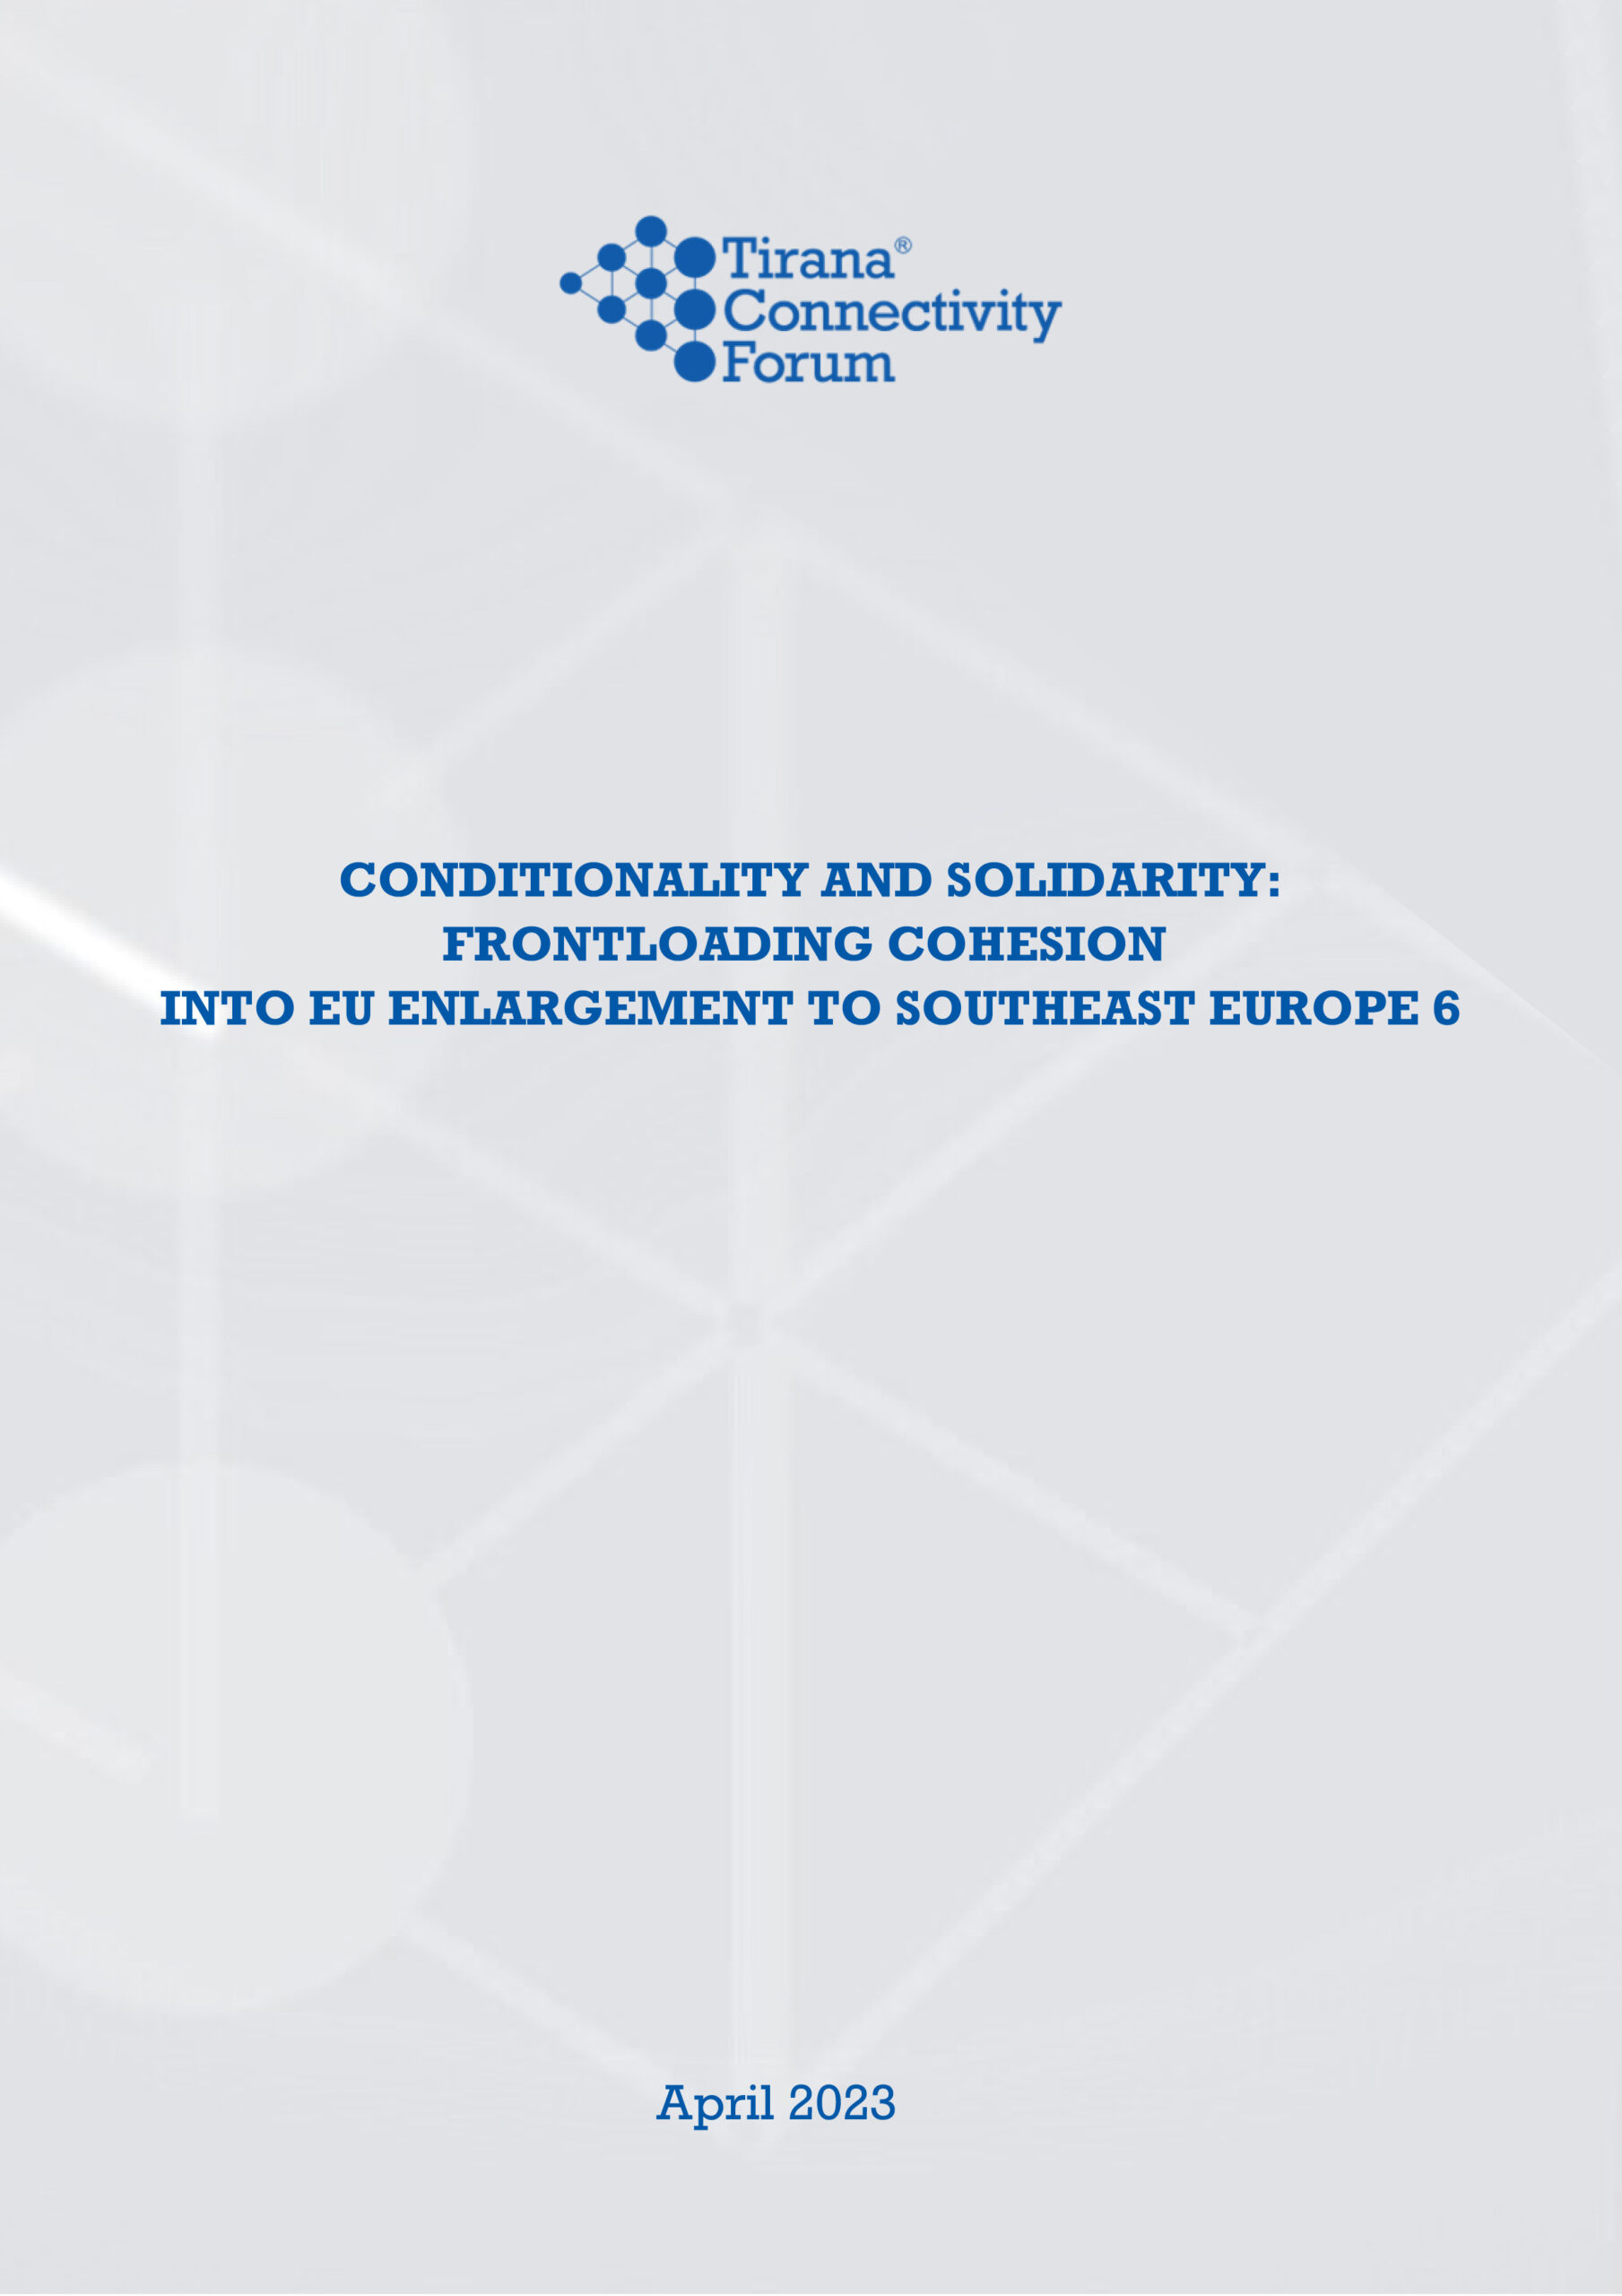 CONDITIONALITY AND SOLIDARITY: FRONTLOADING COHESION INTO EU ENLARGEMENT TO SOUTHEAST EUROPE 6